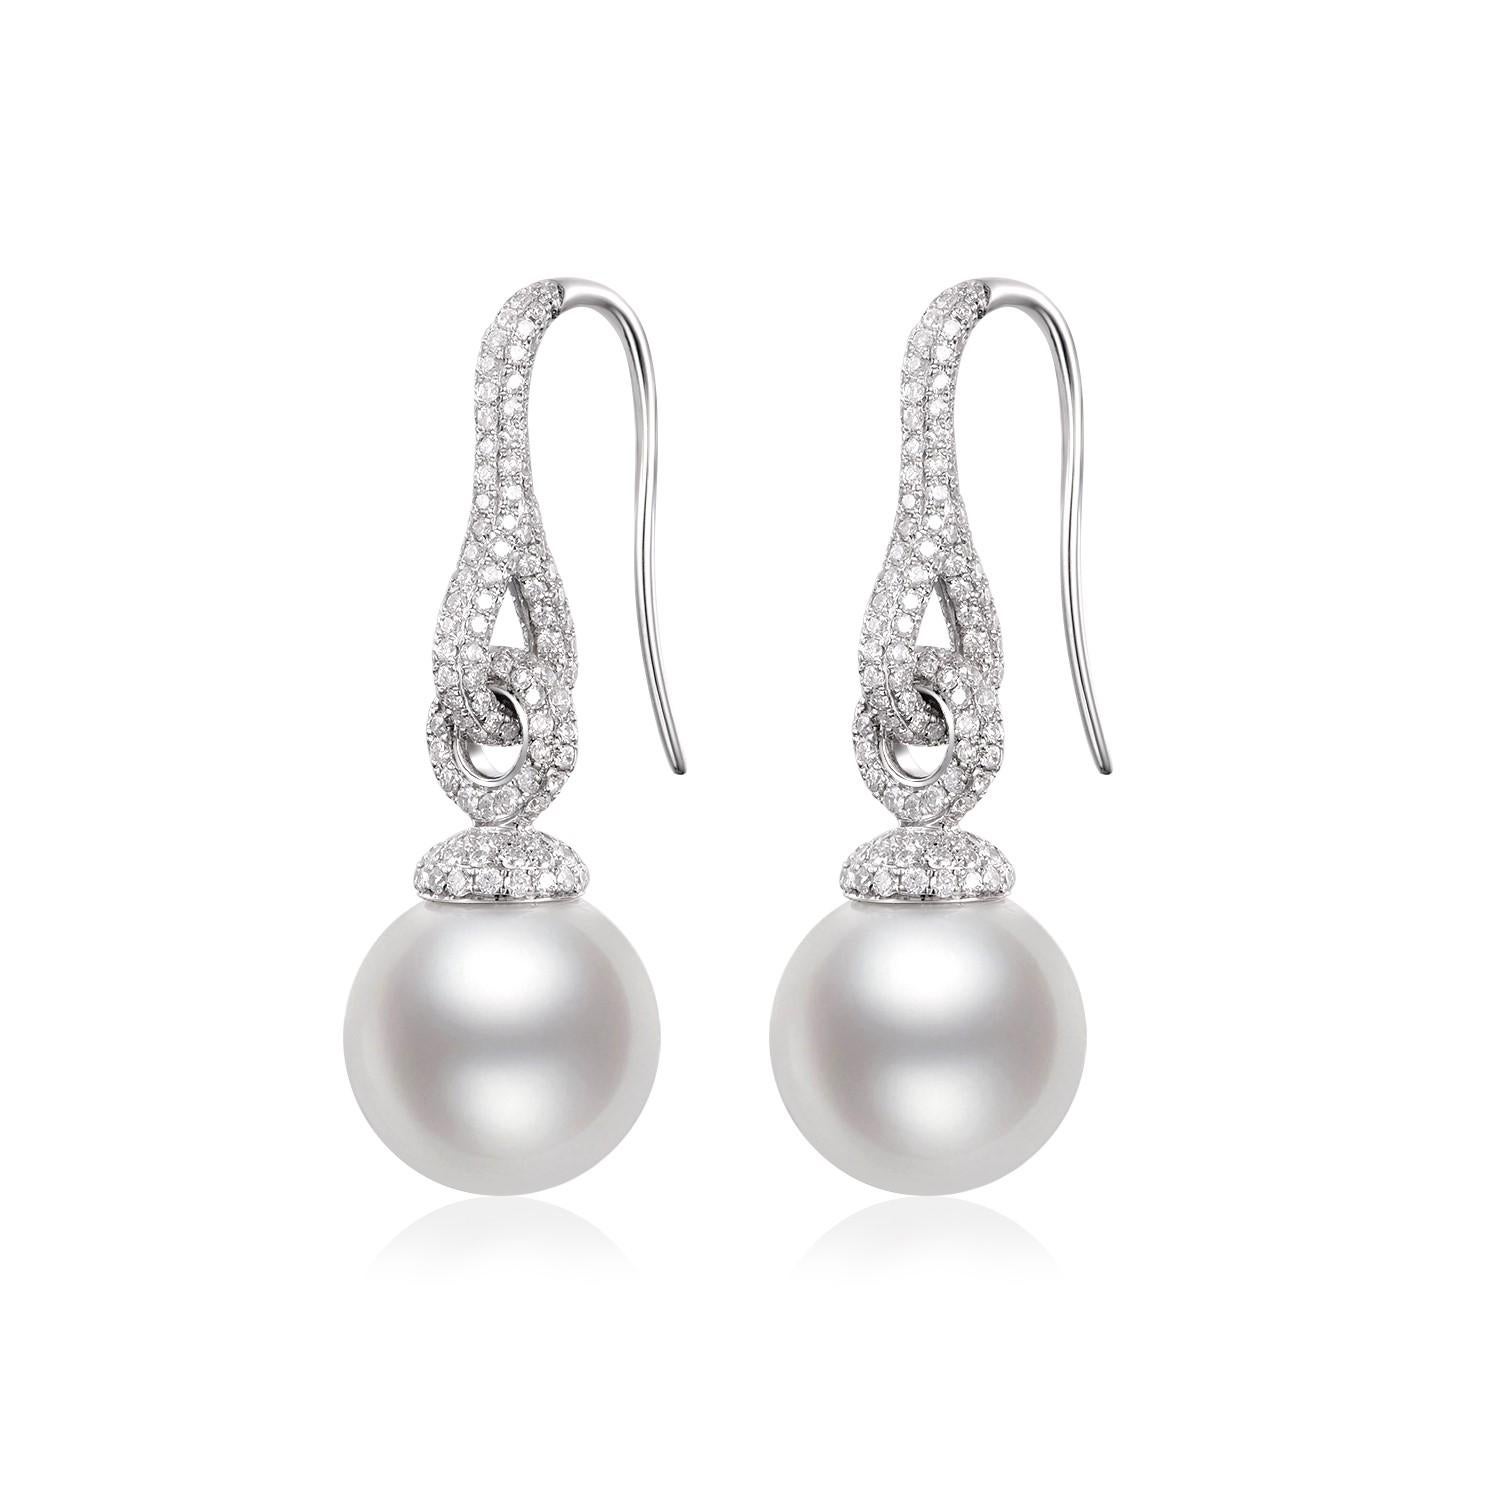 Elegance finds its epitome in the South Sea Pearl Diamond Dangle Earrings. Crafted in pristine 14 Karat White Gold, this pair is a sublime expression of luxury and artistry. At the heart of each earring is a breathtaking 12mm South Sea pearl. Known